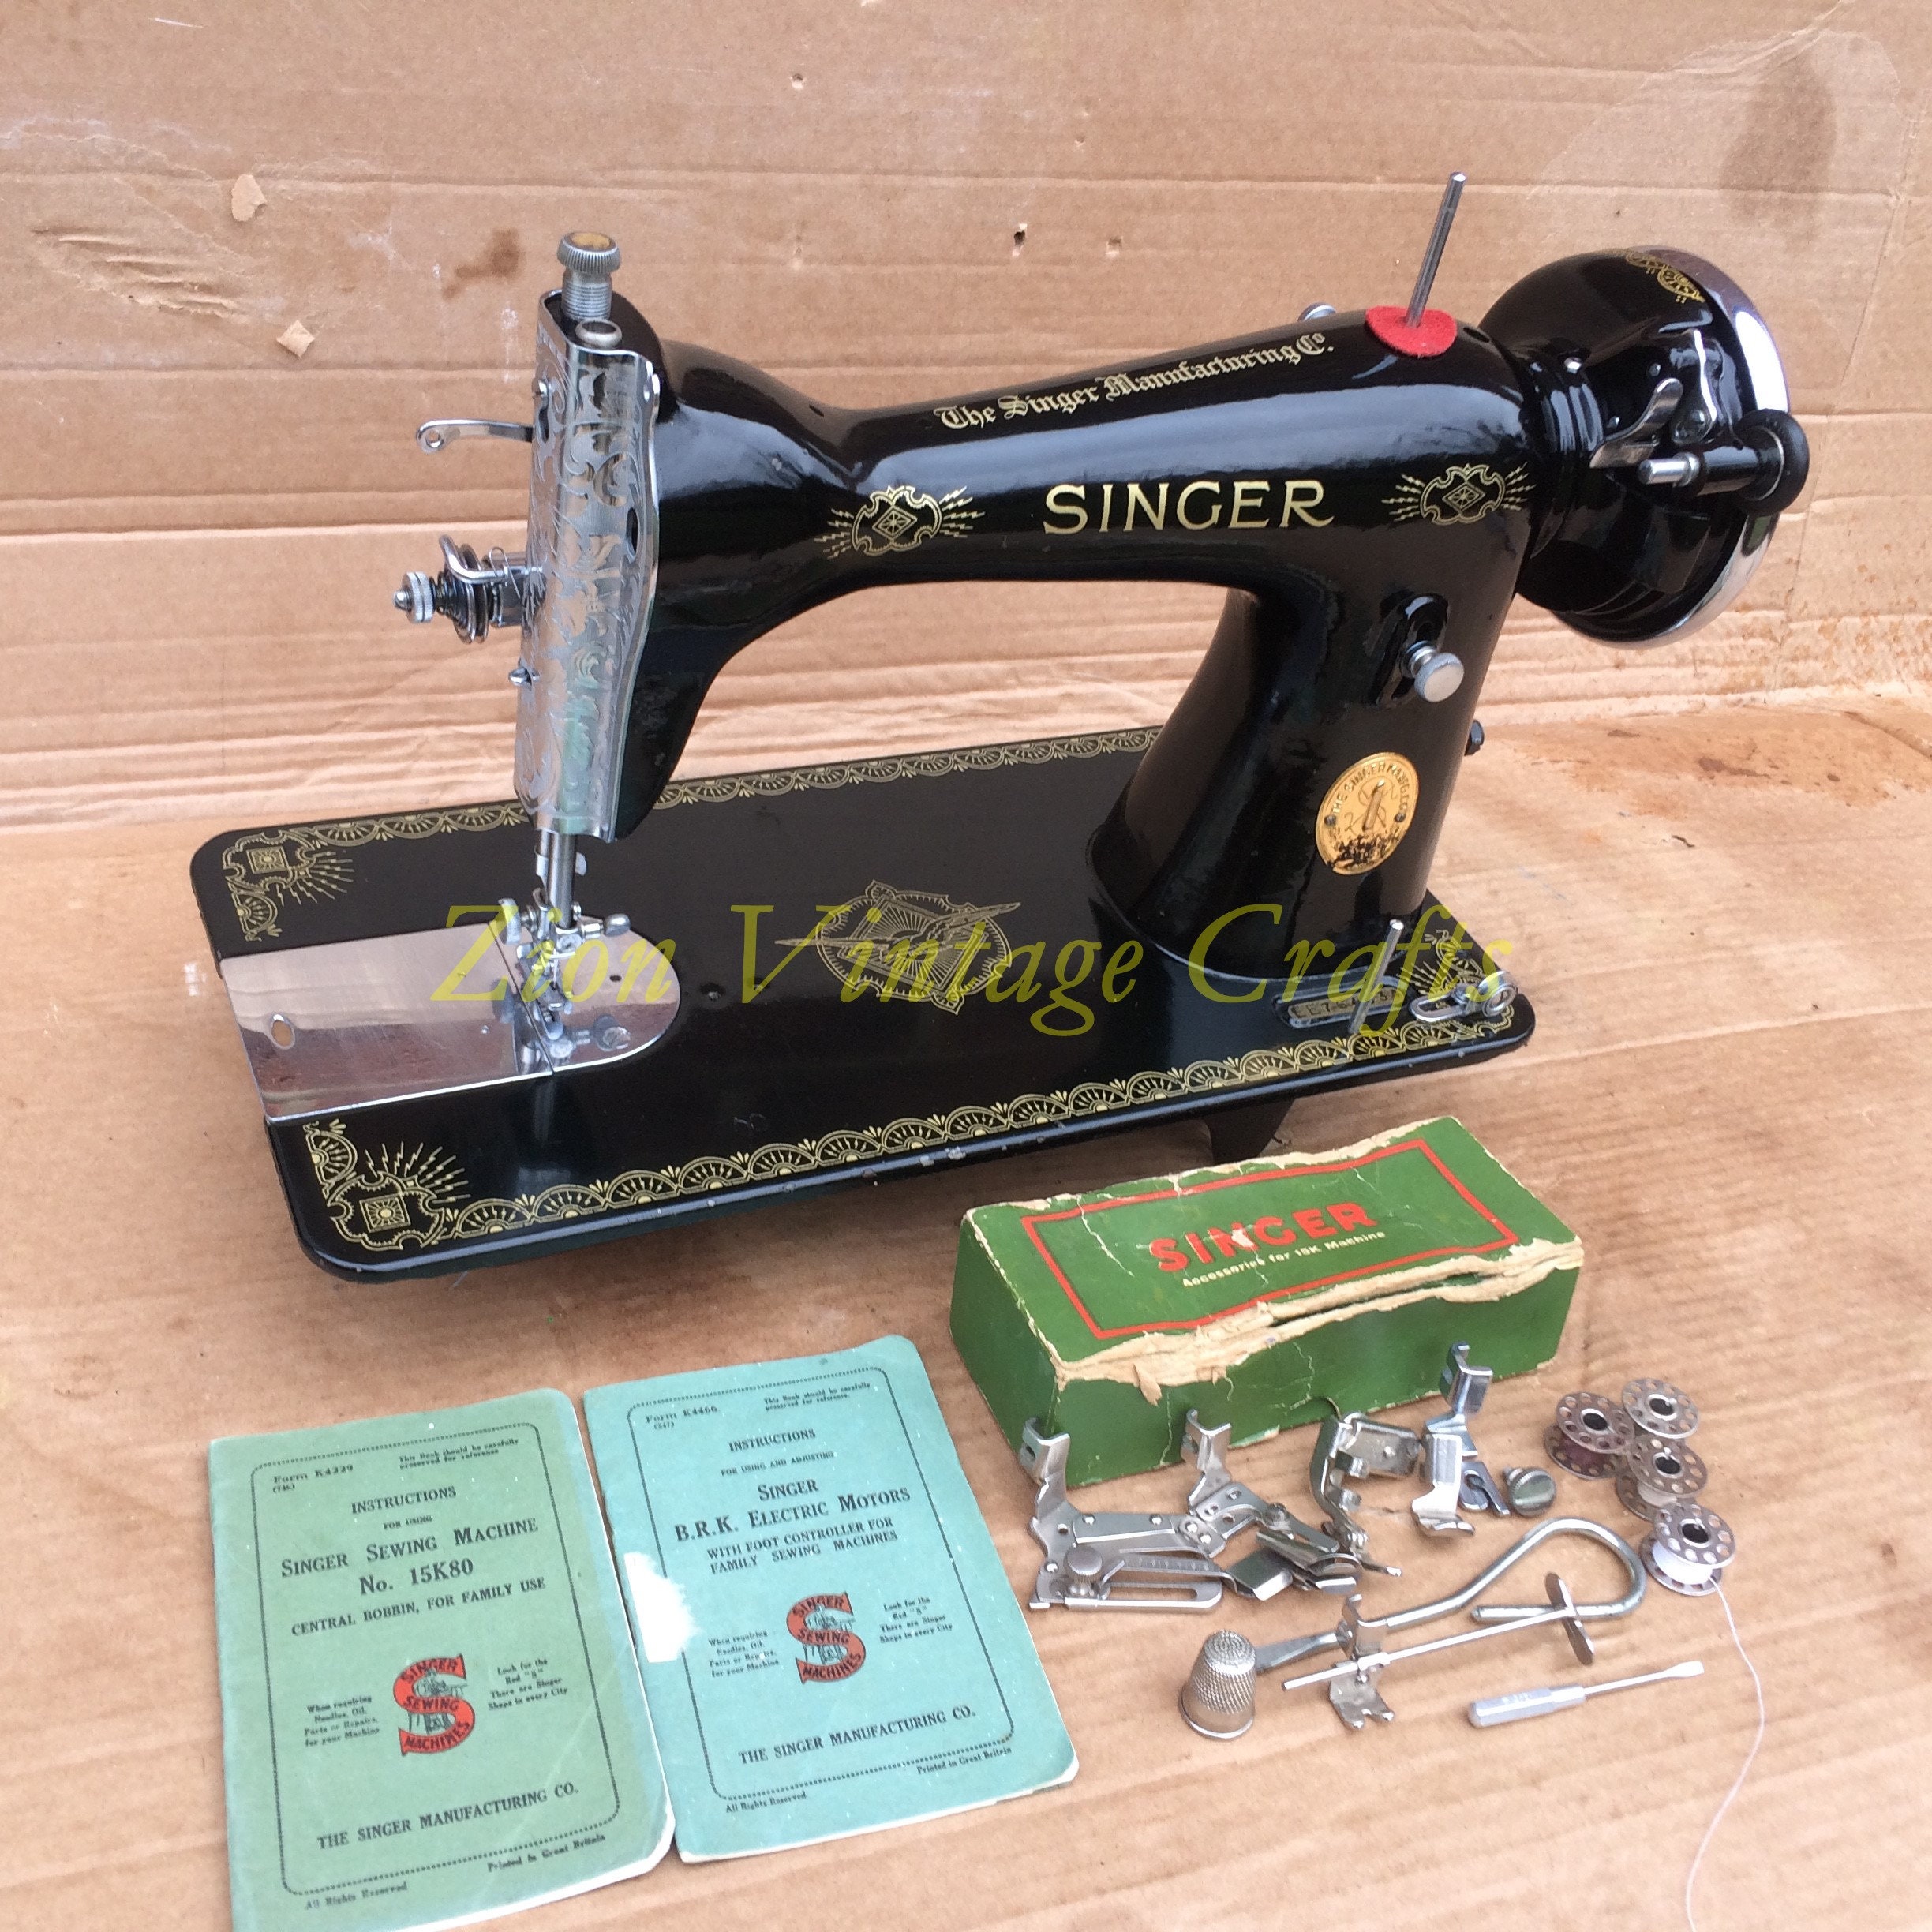 Maquina Singer??  Old sewing machines, Sewing machine parts